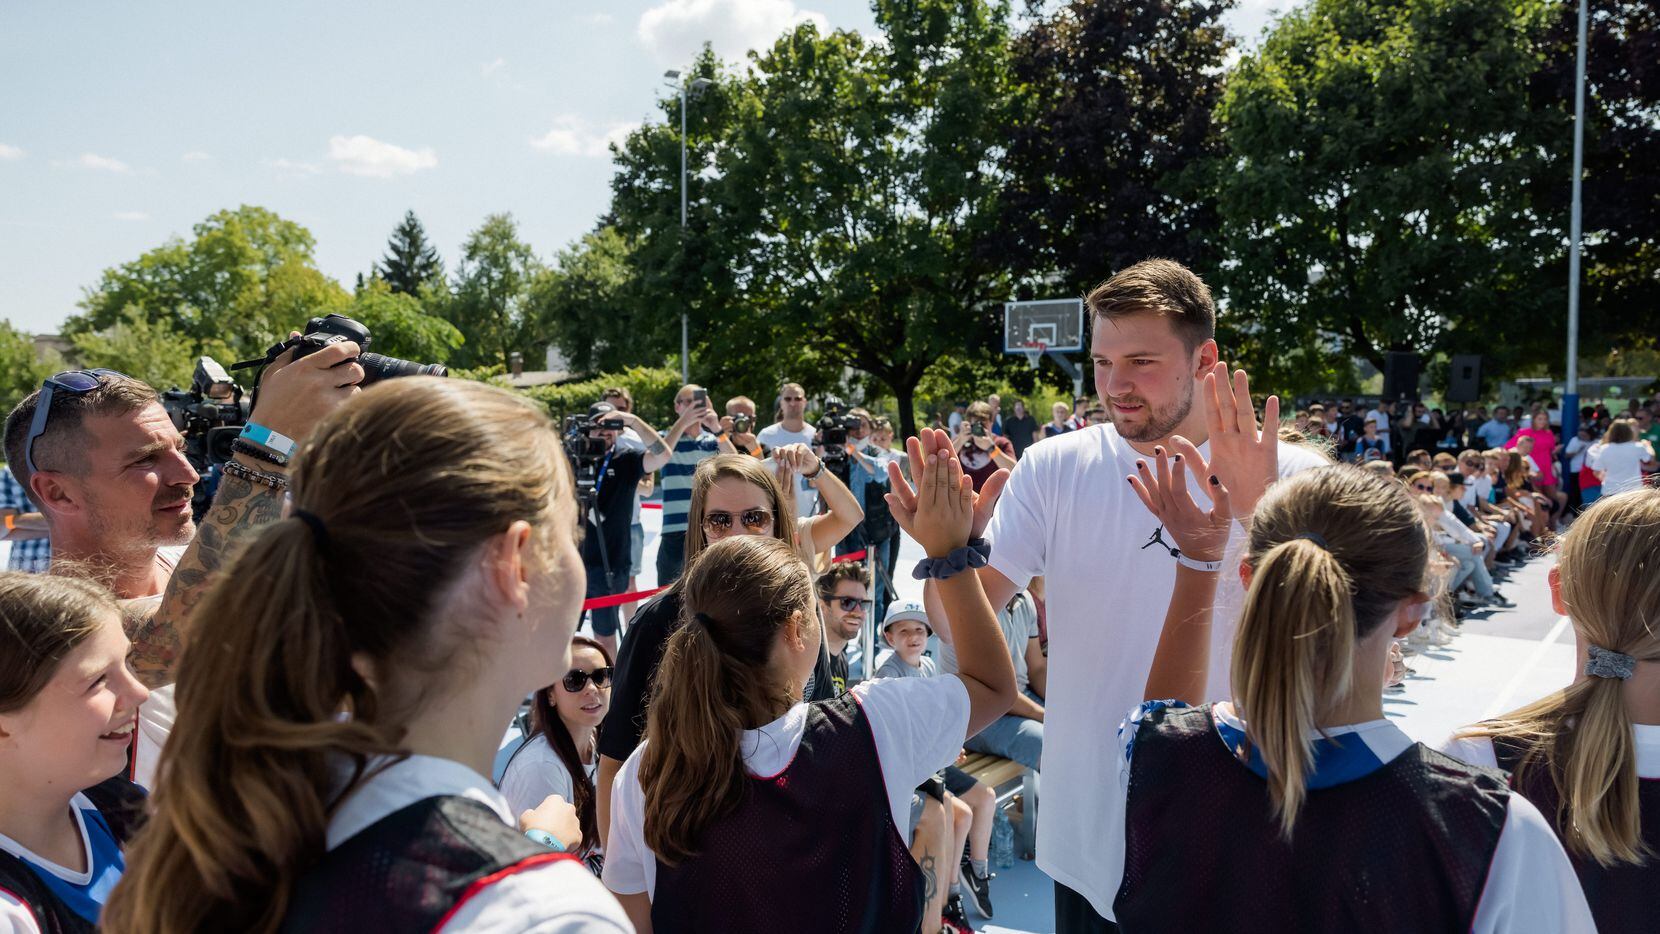 Luka Doncic give out high fives at the unveiling of the brand new courts he designed for his home town of Ljubljana, Slovenia. The new courts were part of a charitable effort from Doncic and 2K Foundations, the philanthropic arm of 2K.